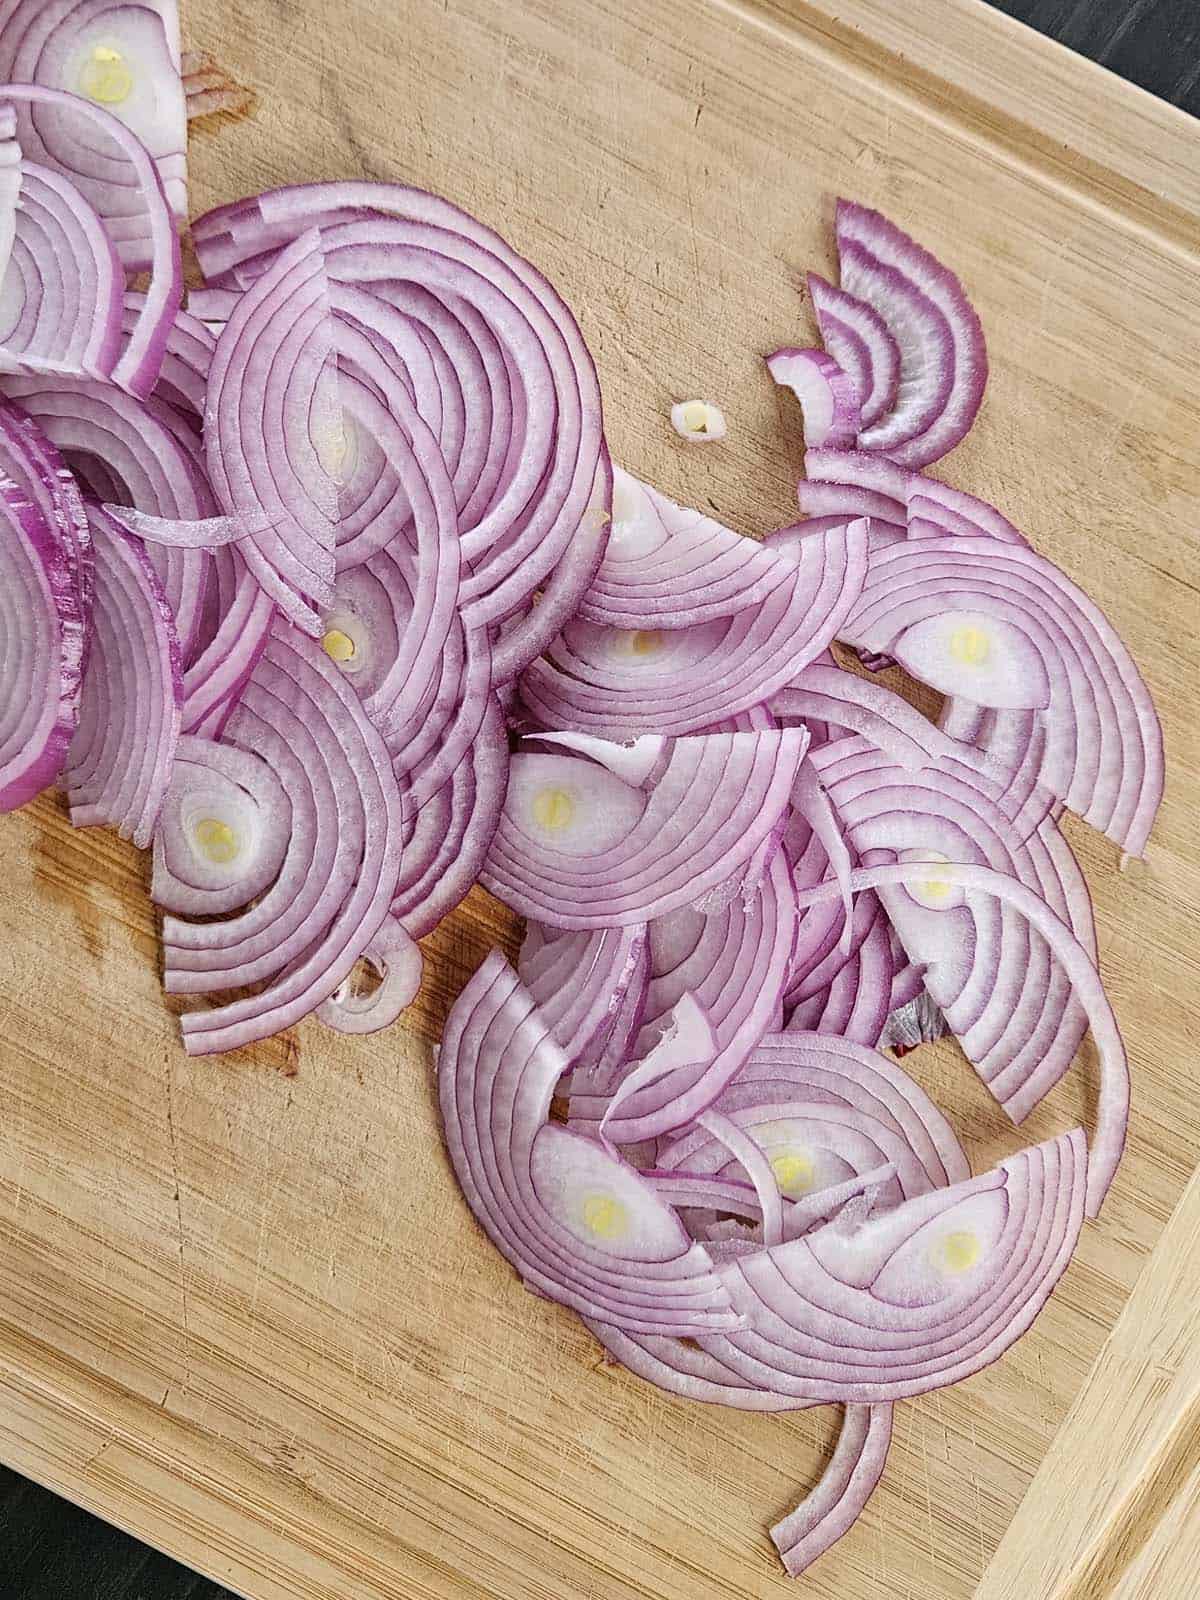 Slice red onions on a cutting board.